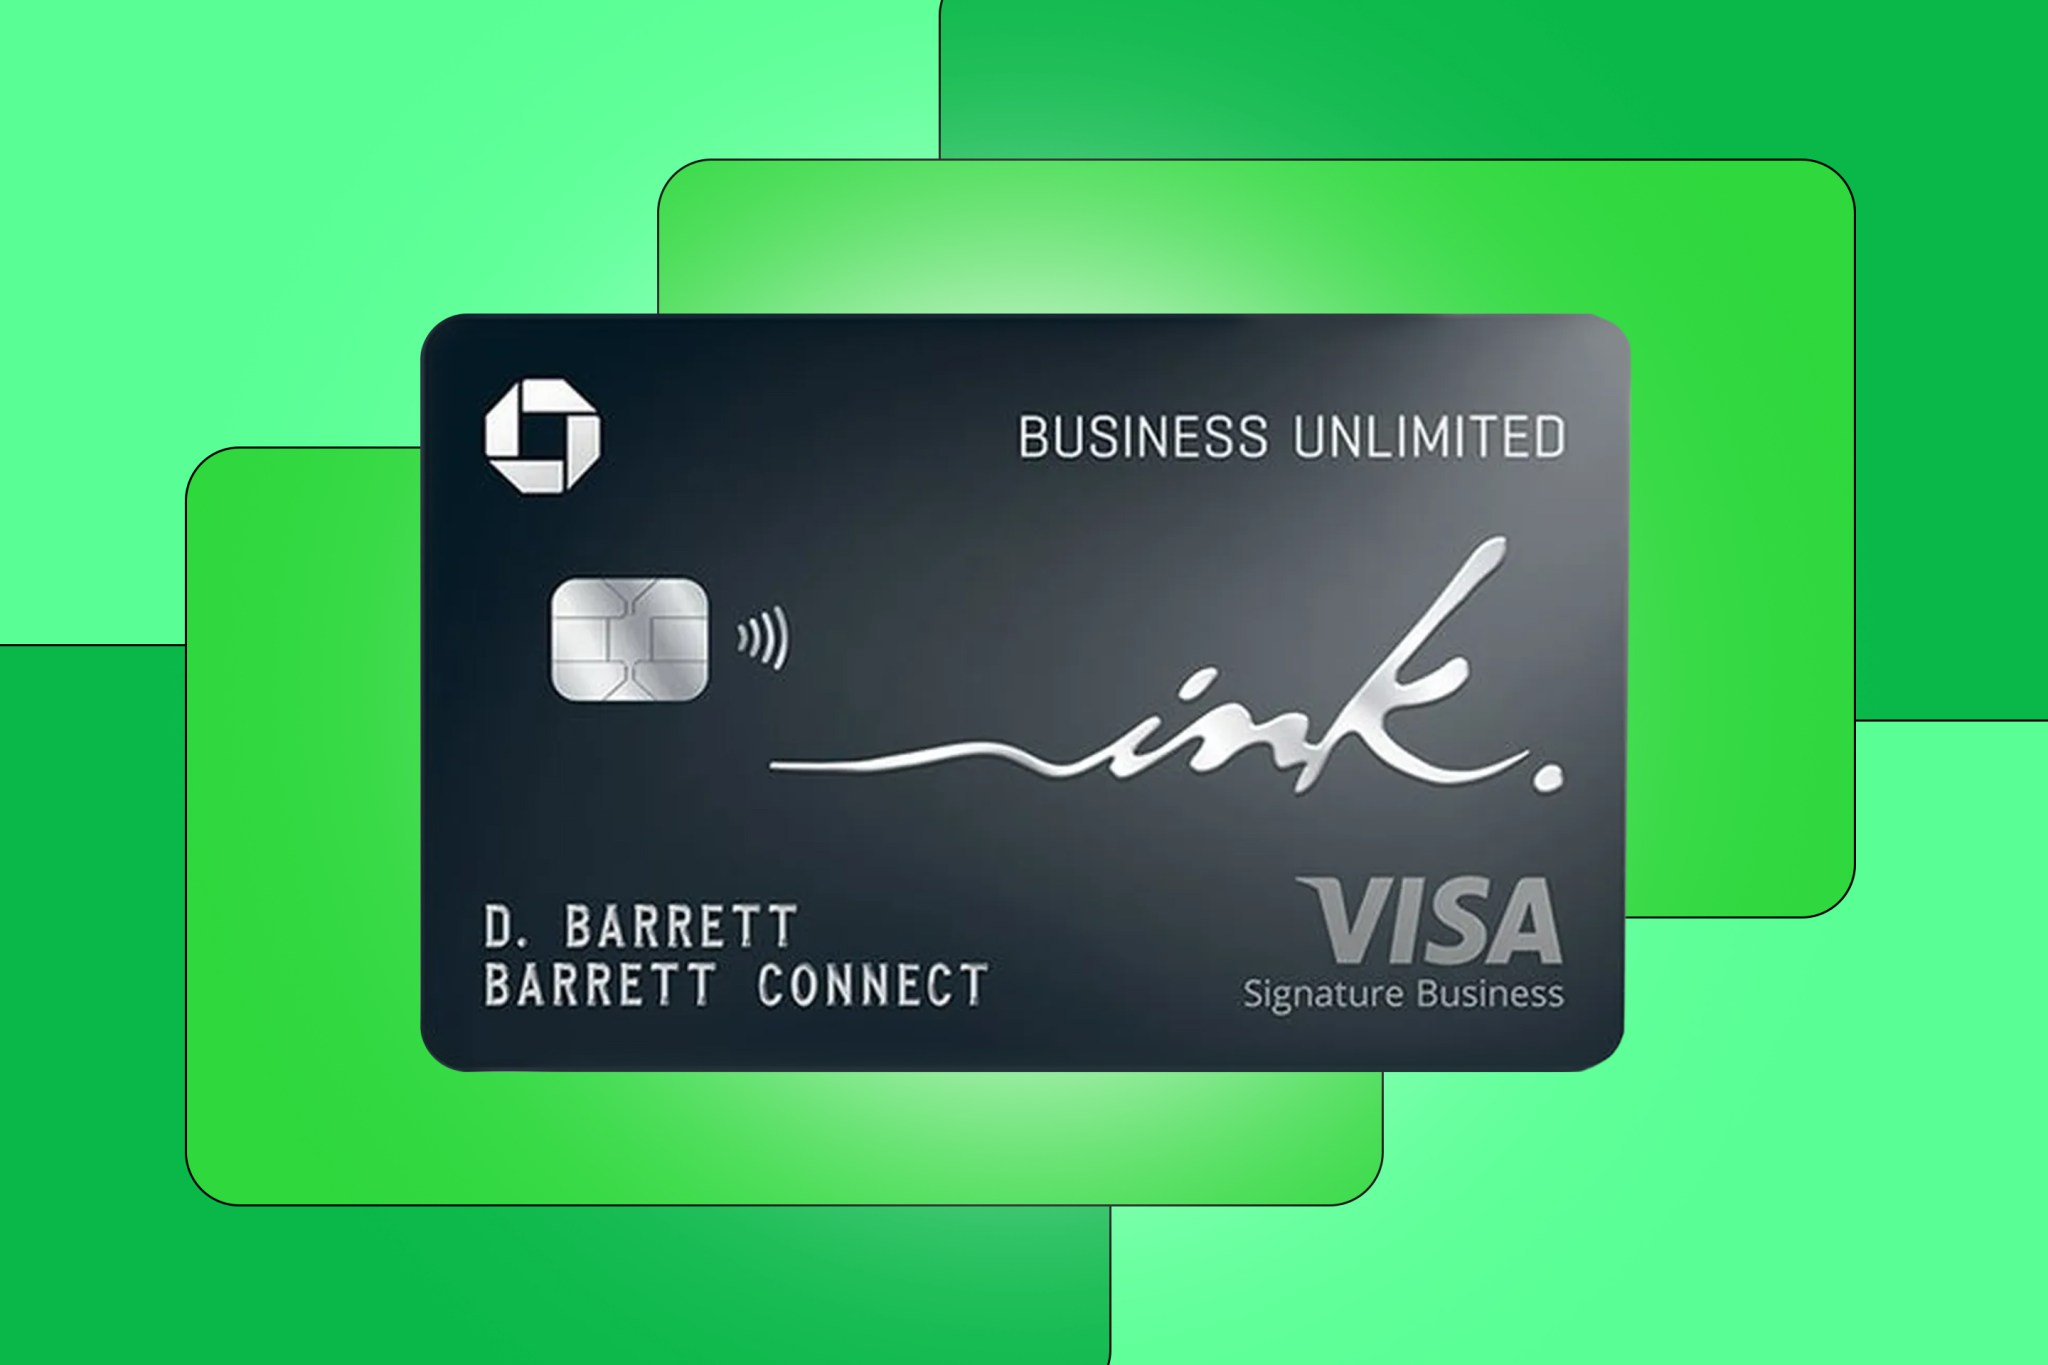 Chase Ink Business Unlimited review: an easy 1.5% cash back on all purchases